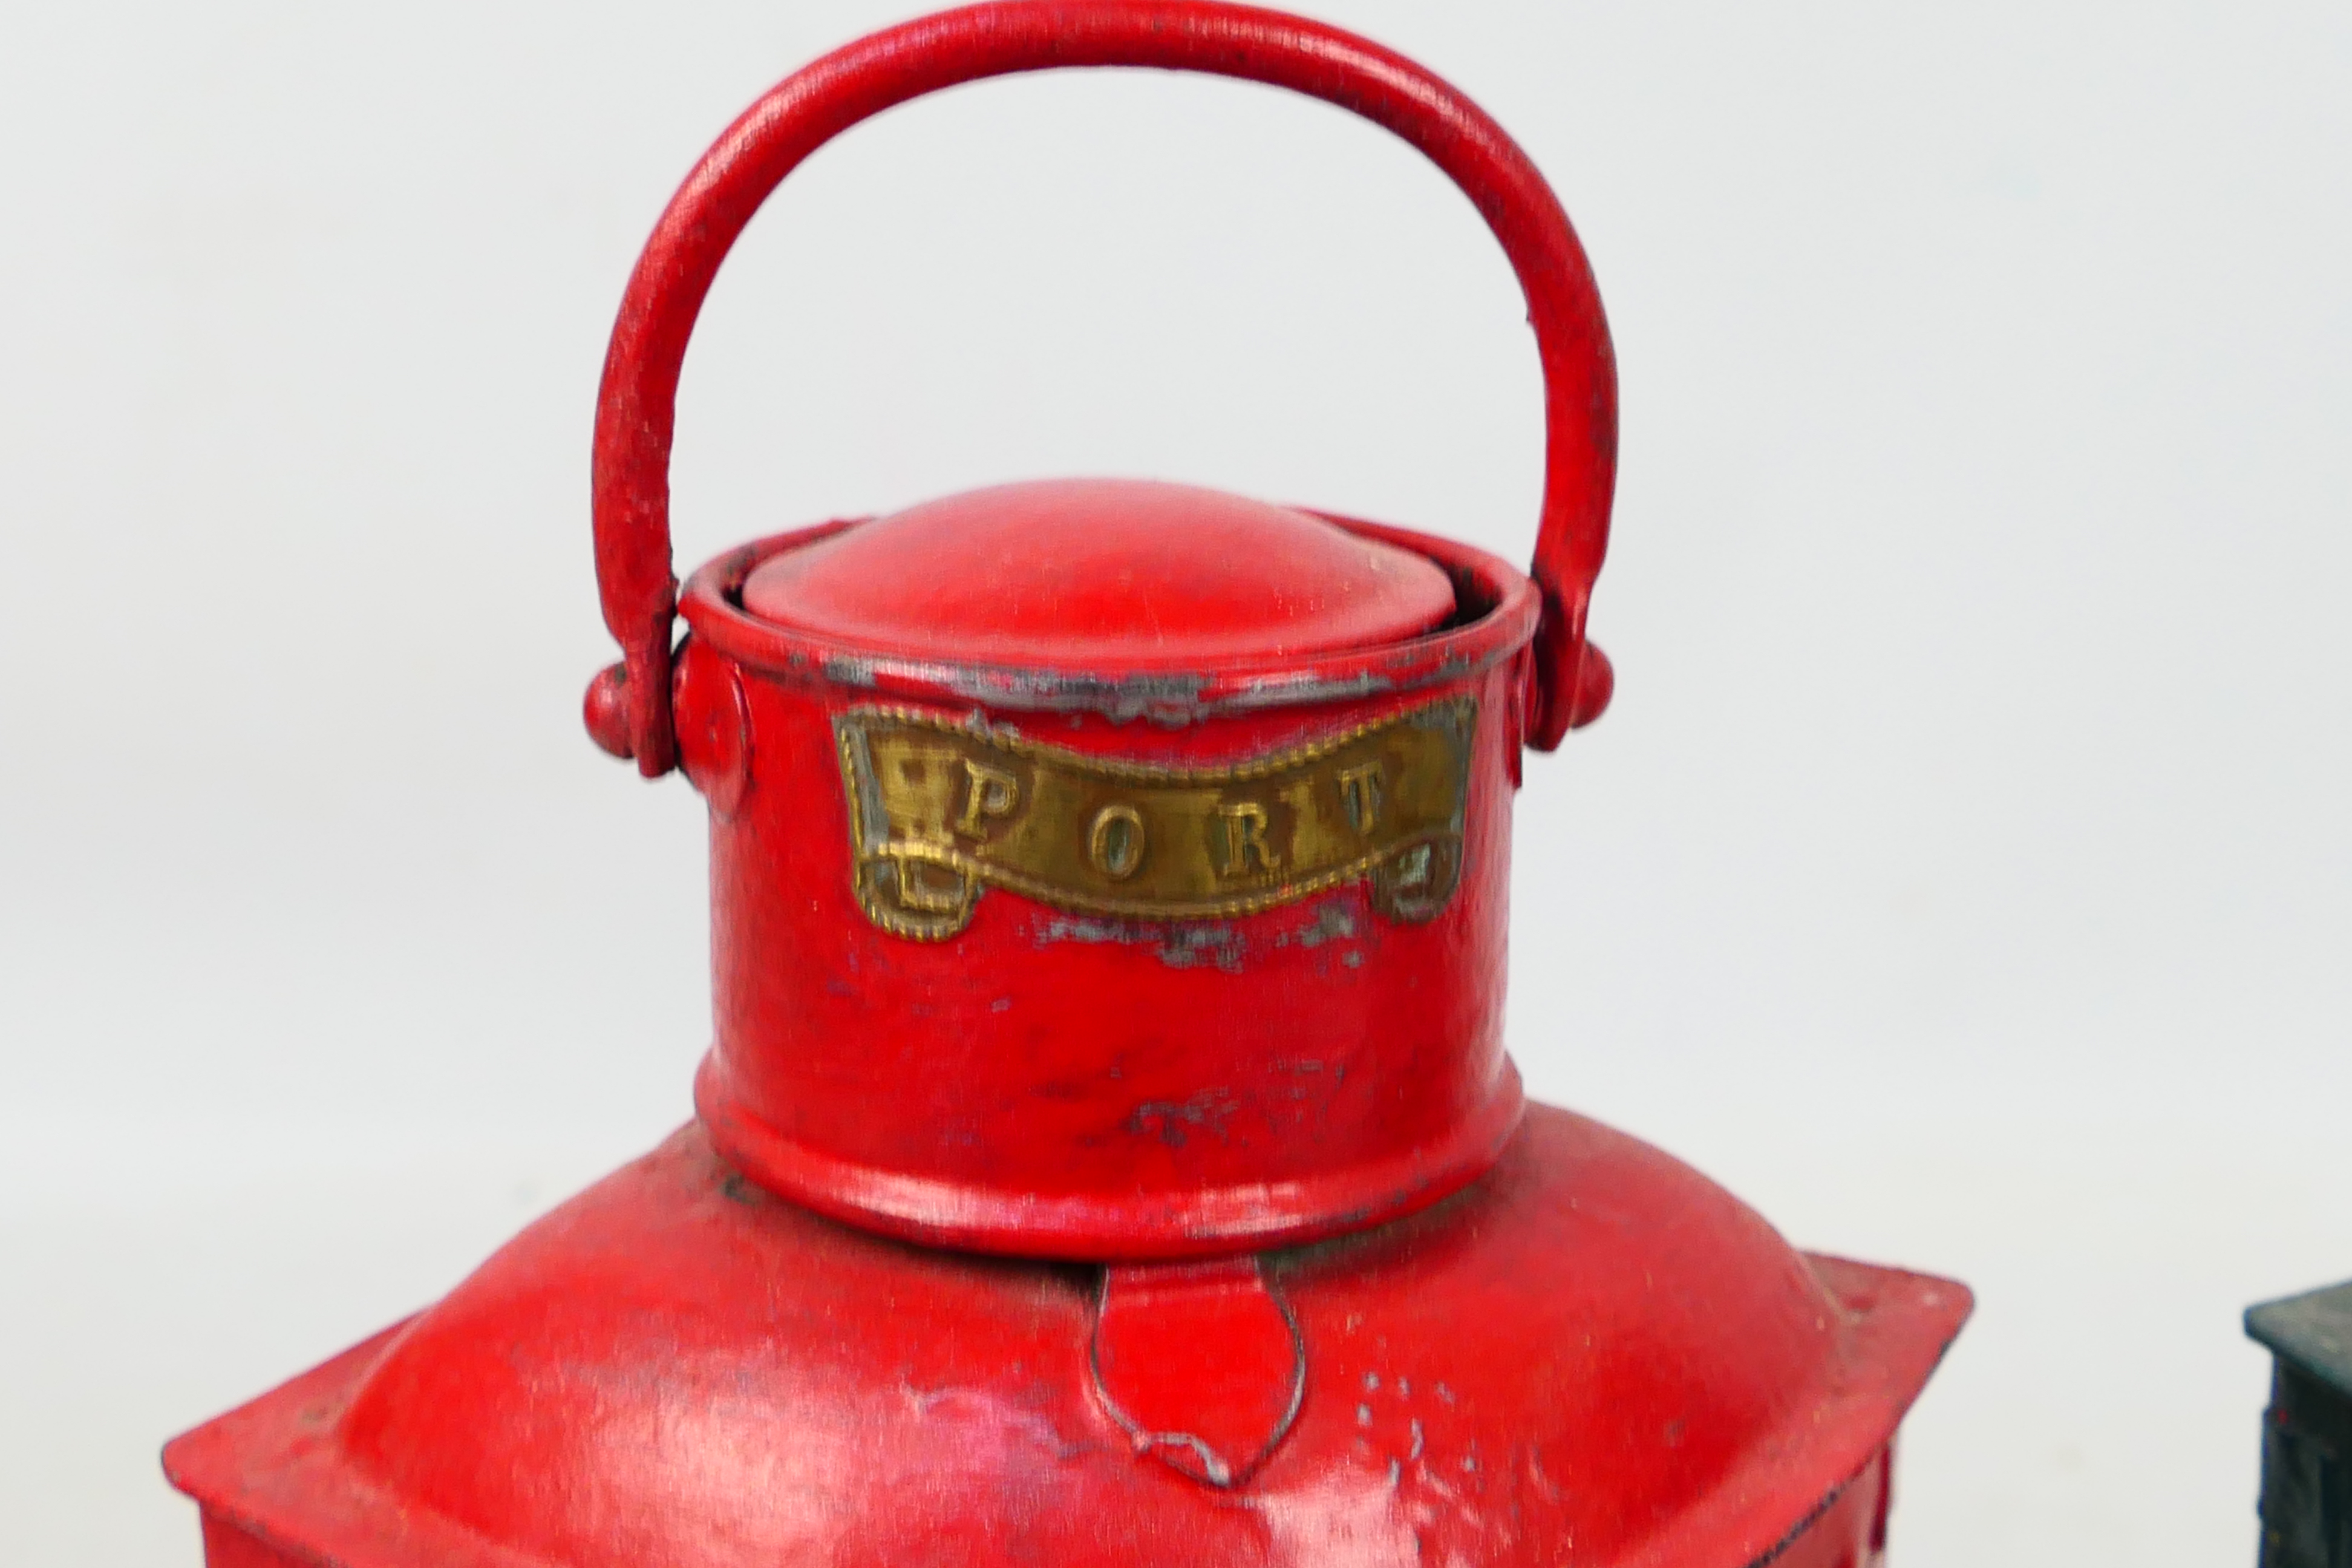 Two ships lights / lanterns, Port and Starboard, approximately 22 cm (h) not including handles. - Image 2 of 4